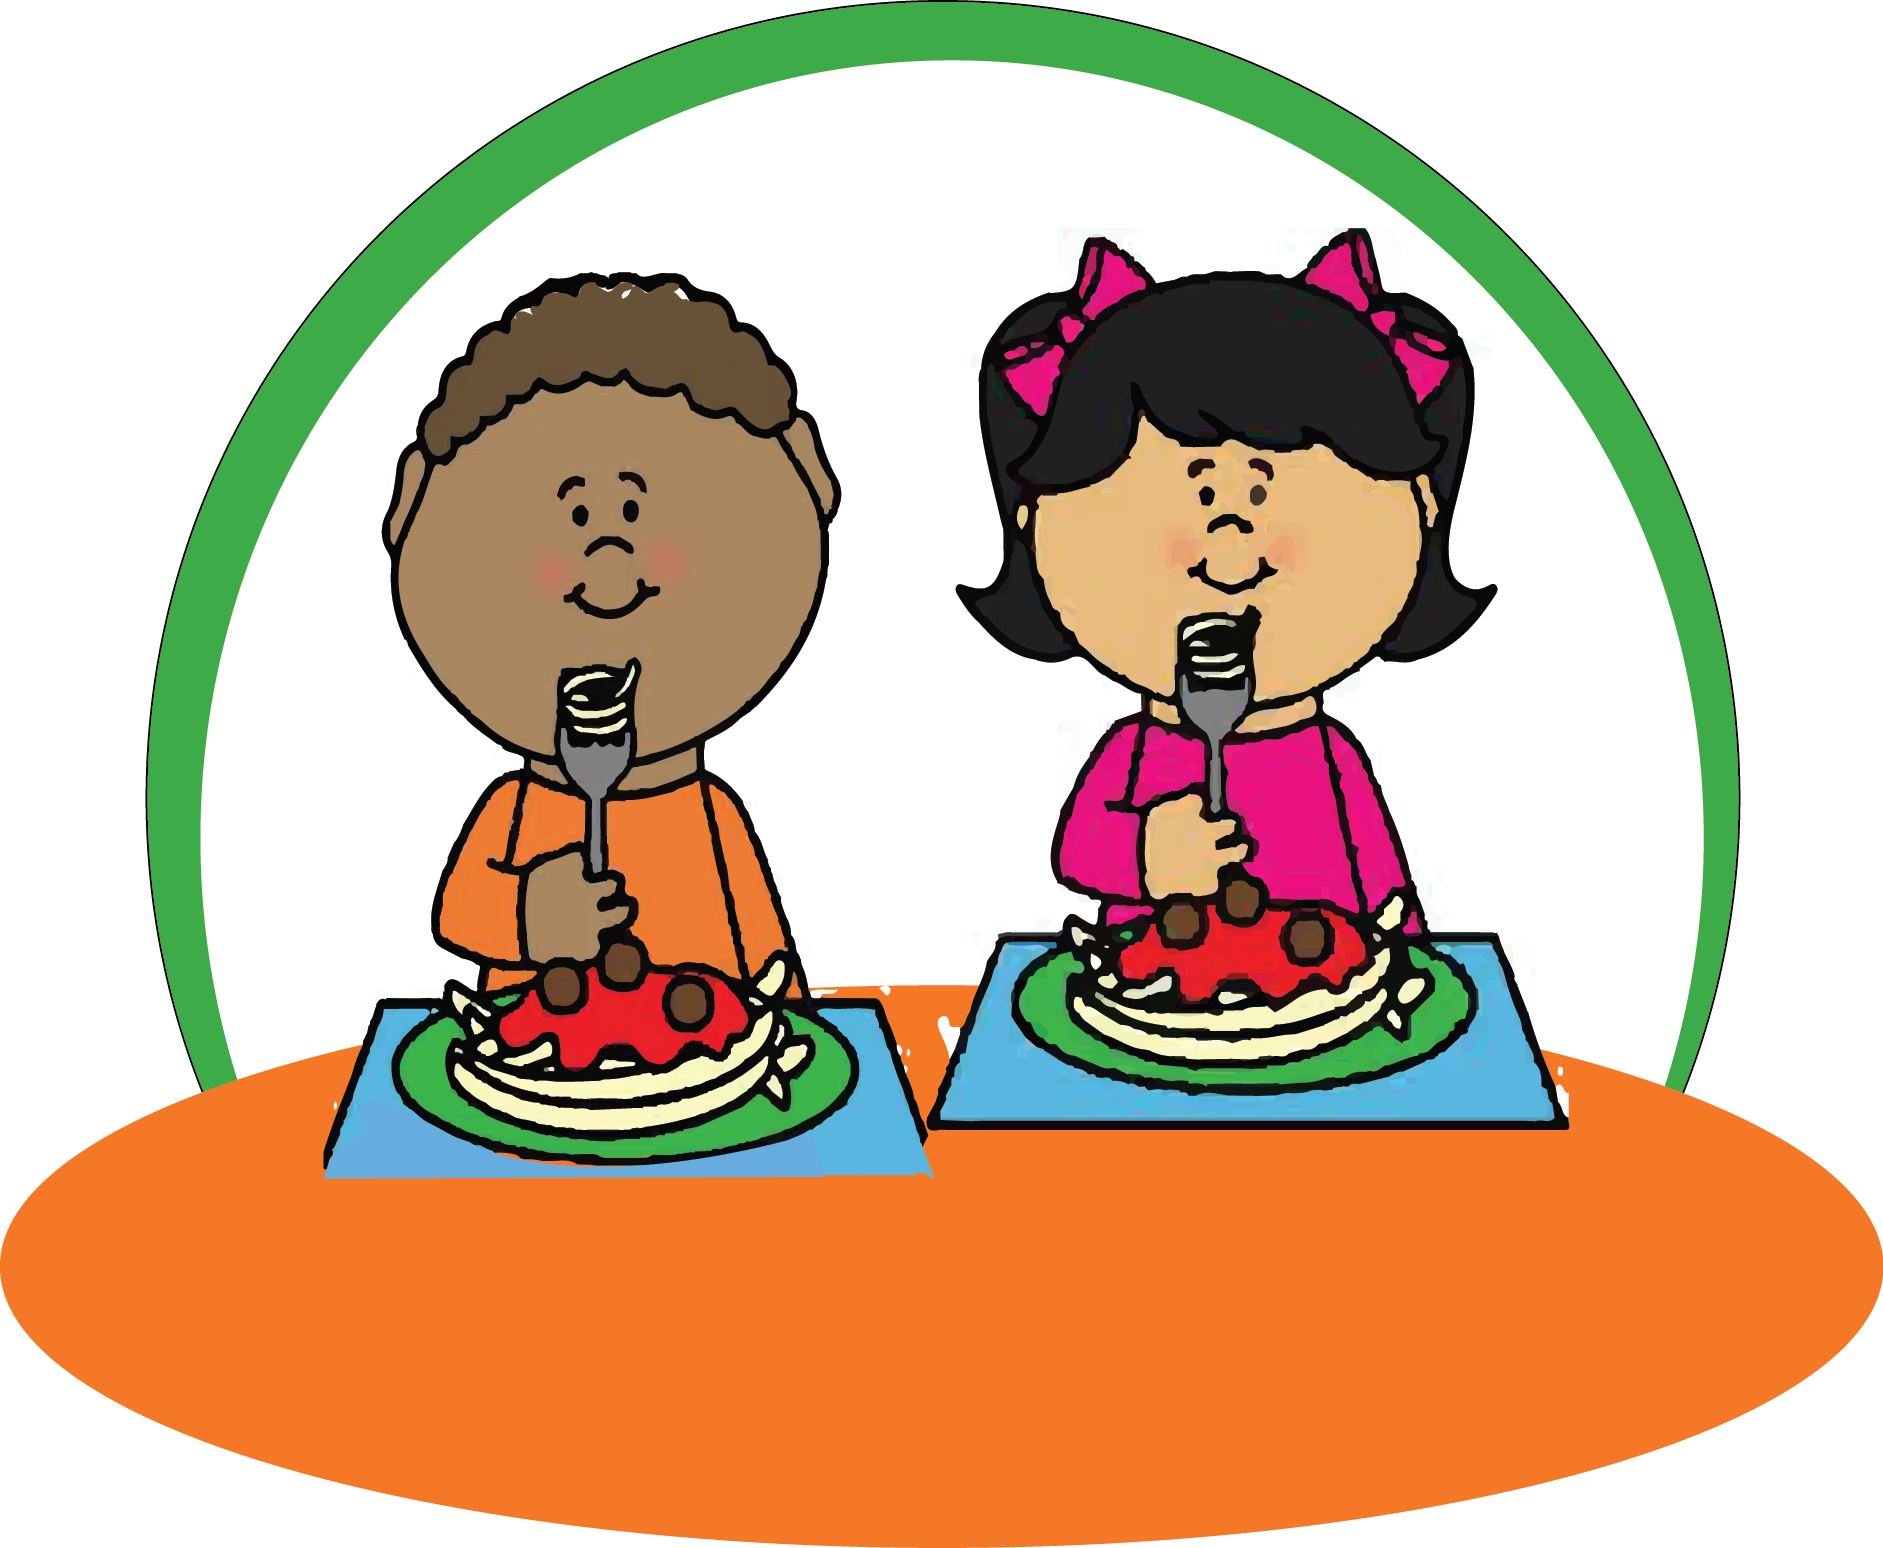 A Cartoon Of Kids Eating At A Table